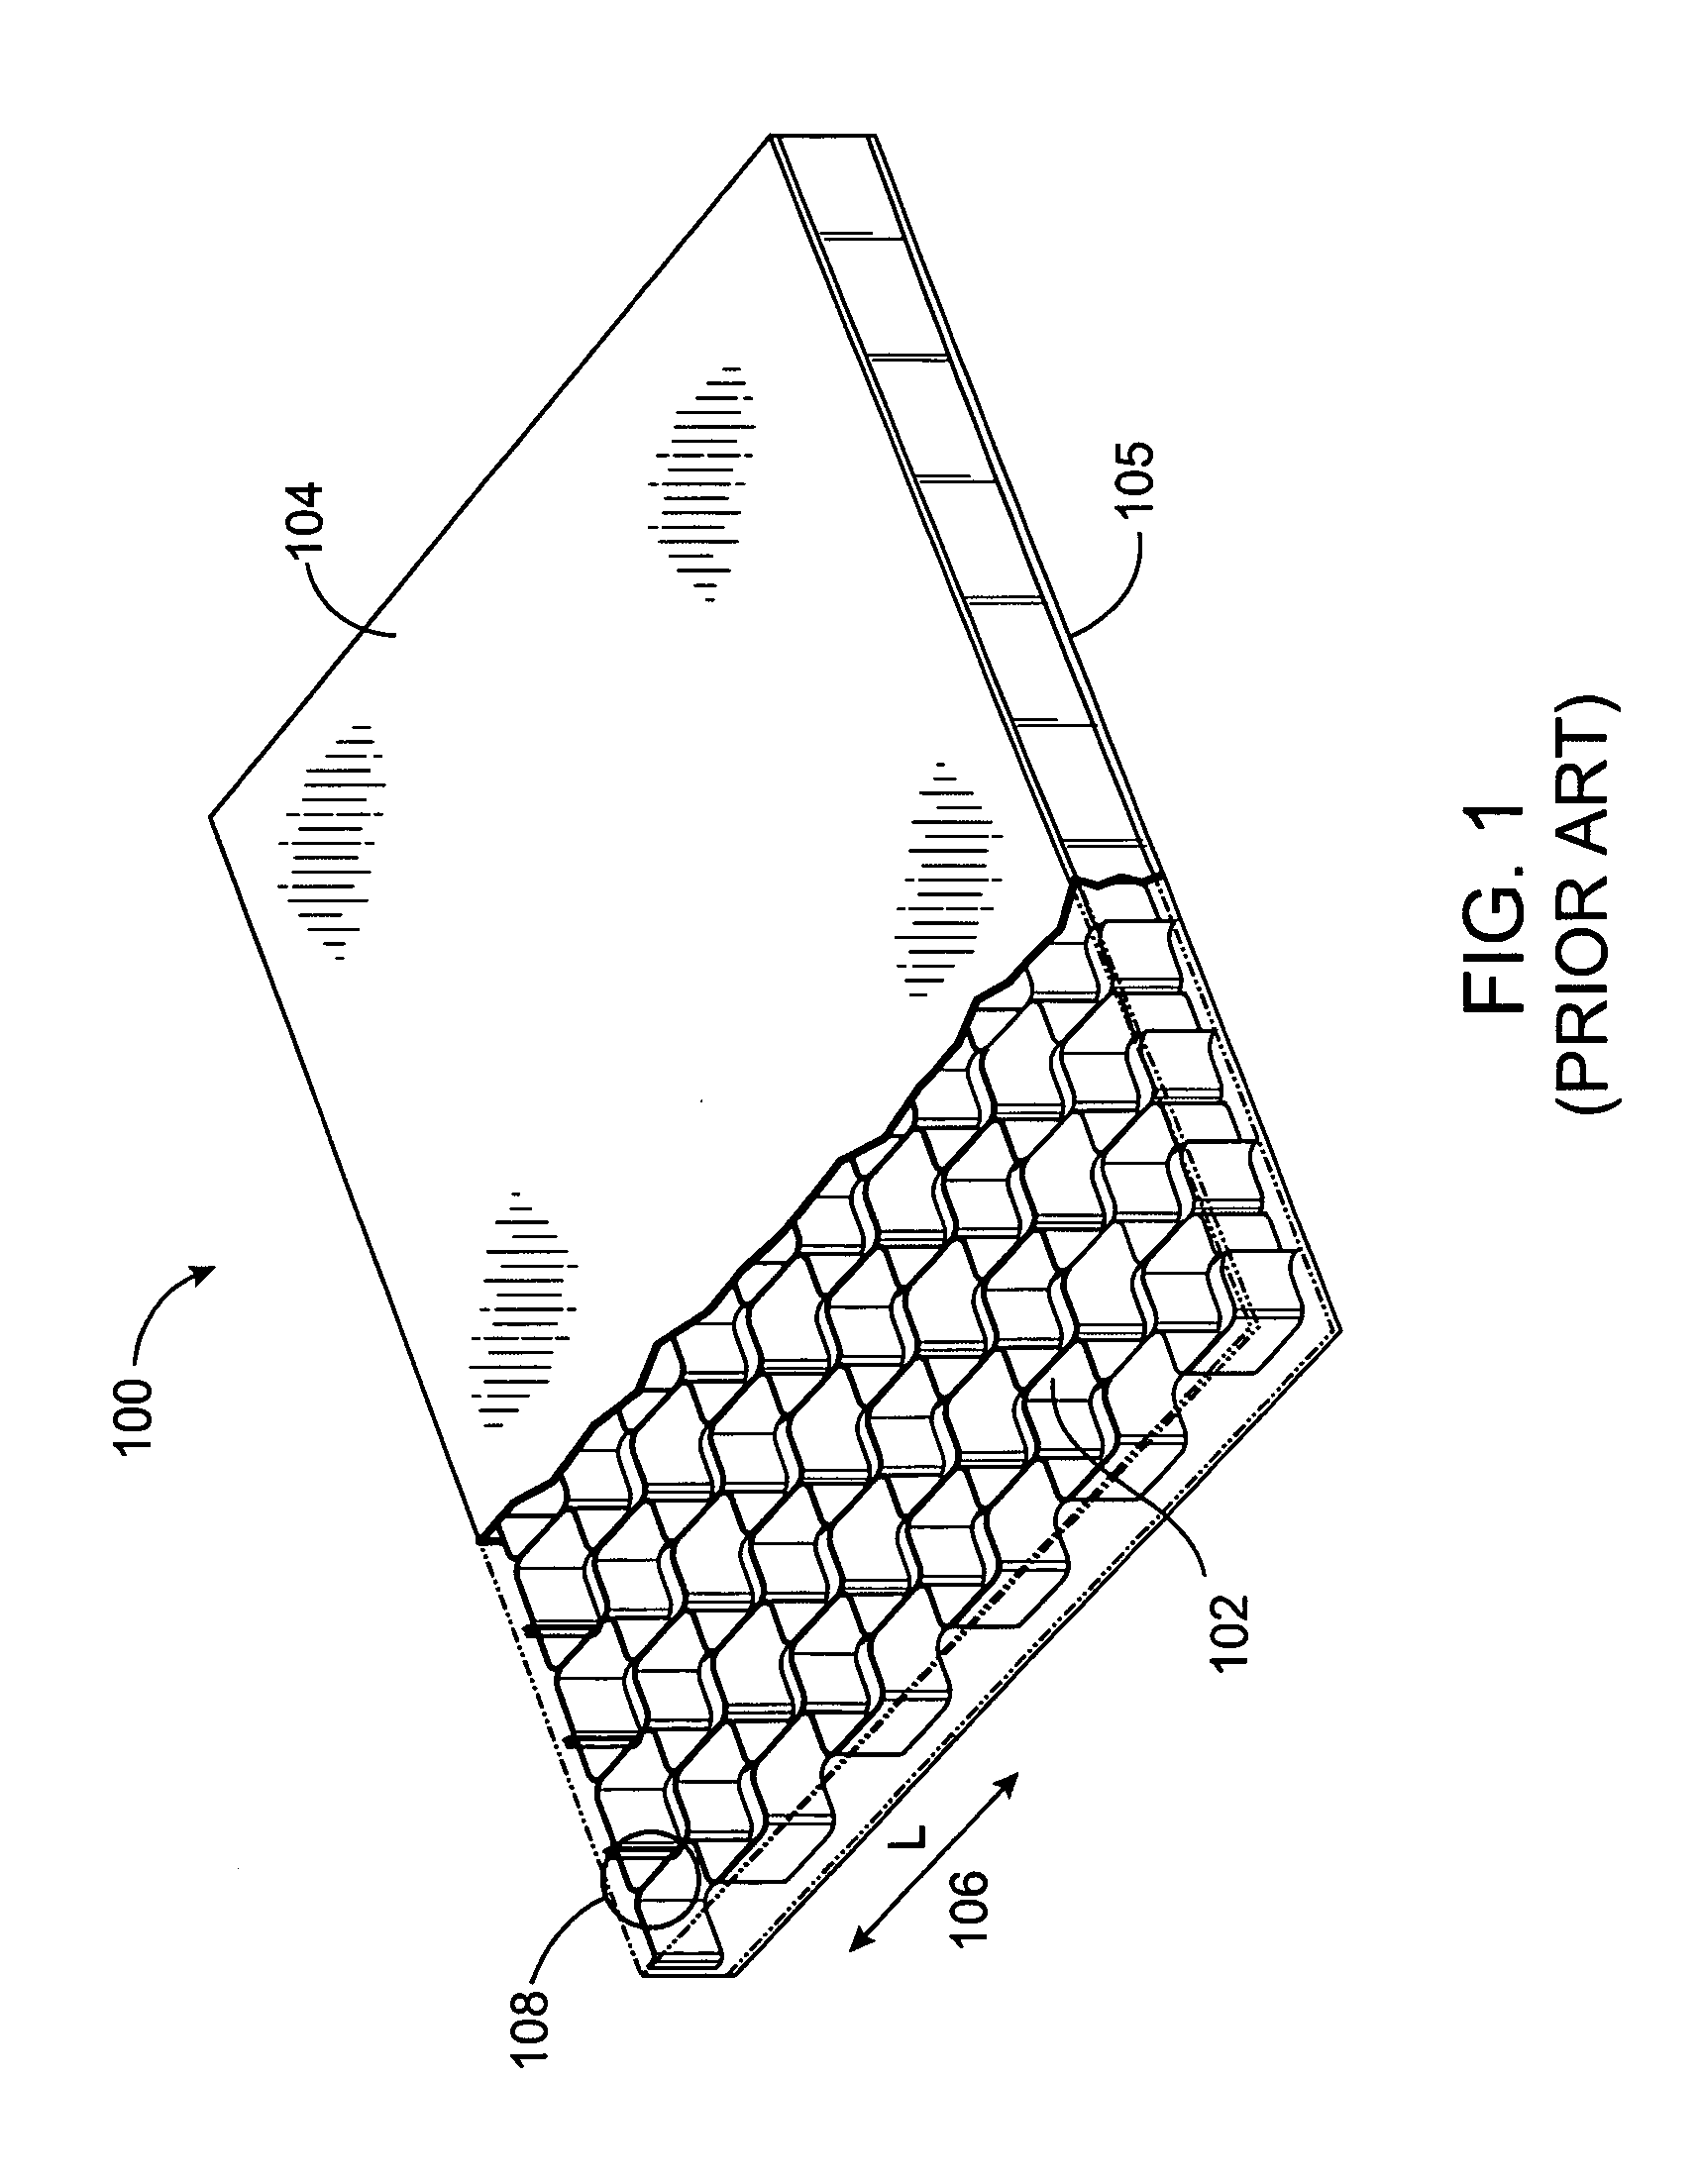 Multi-section mattress or mattress overlay and method of making same